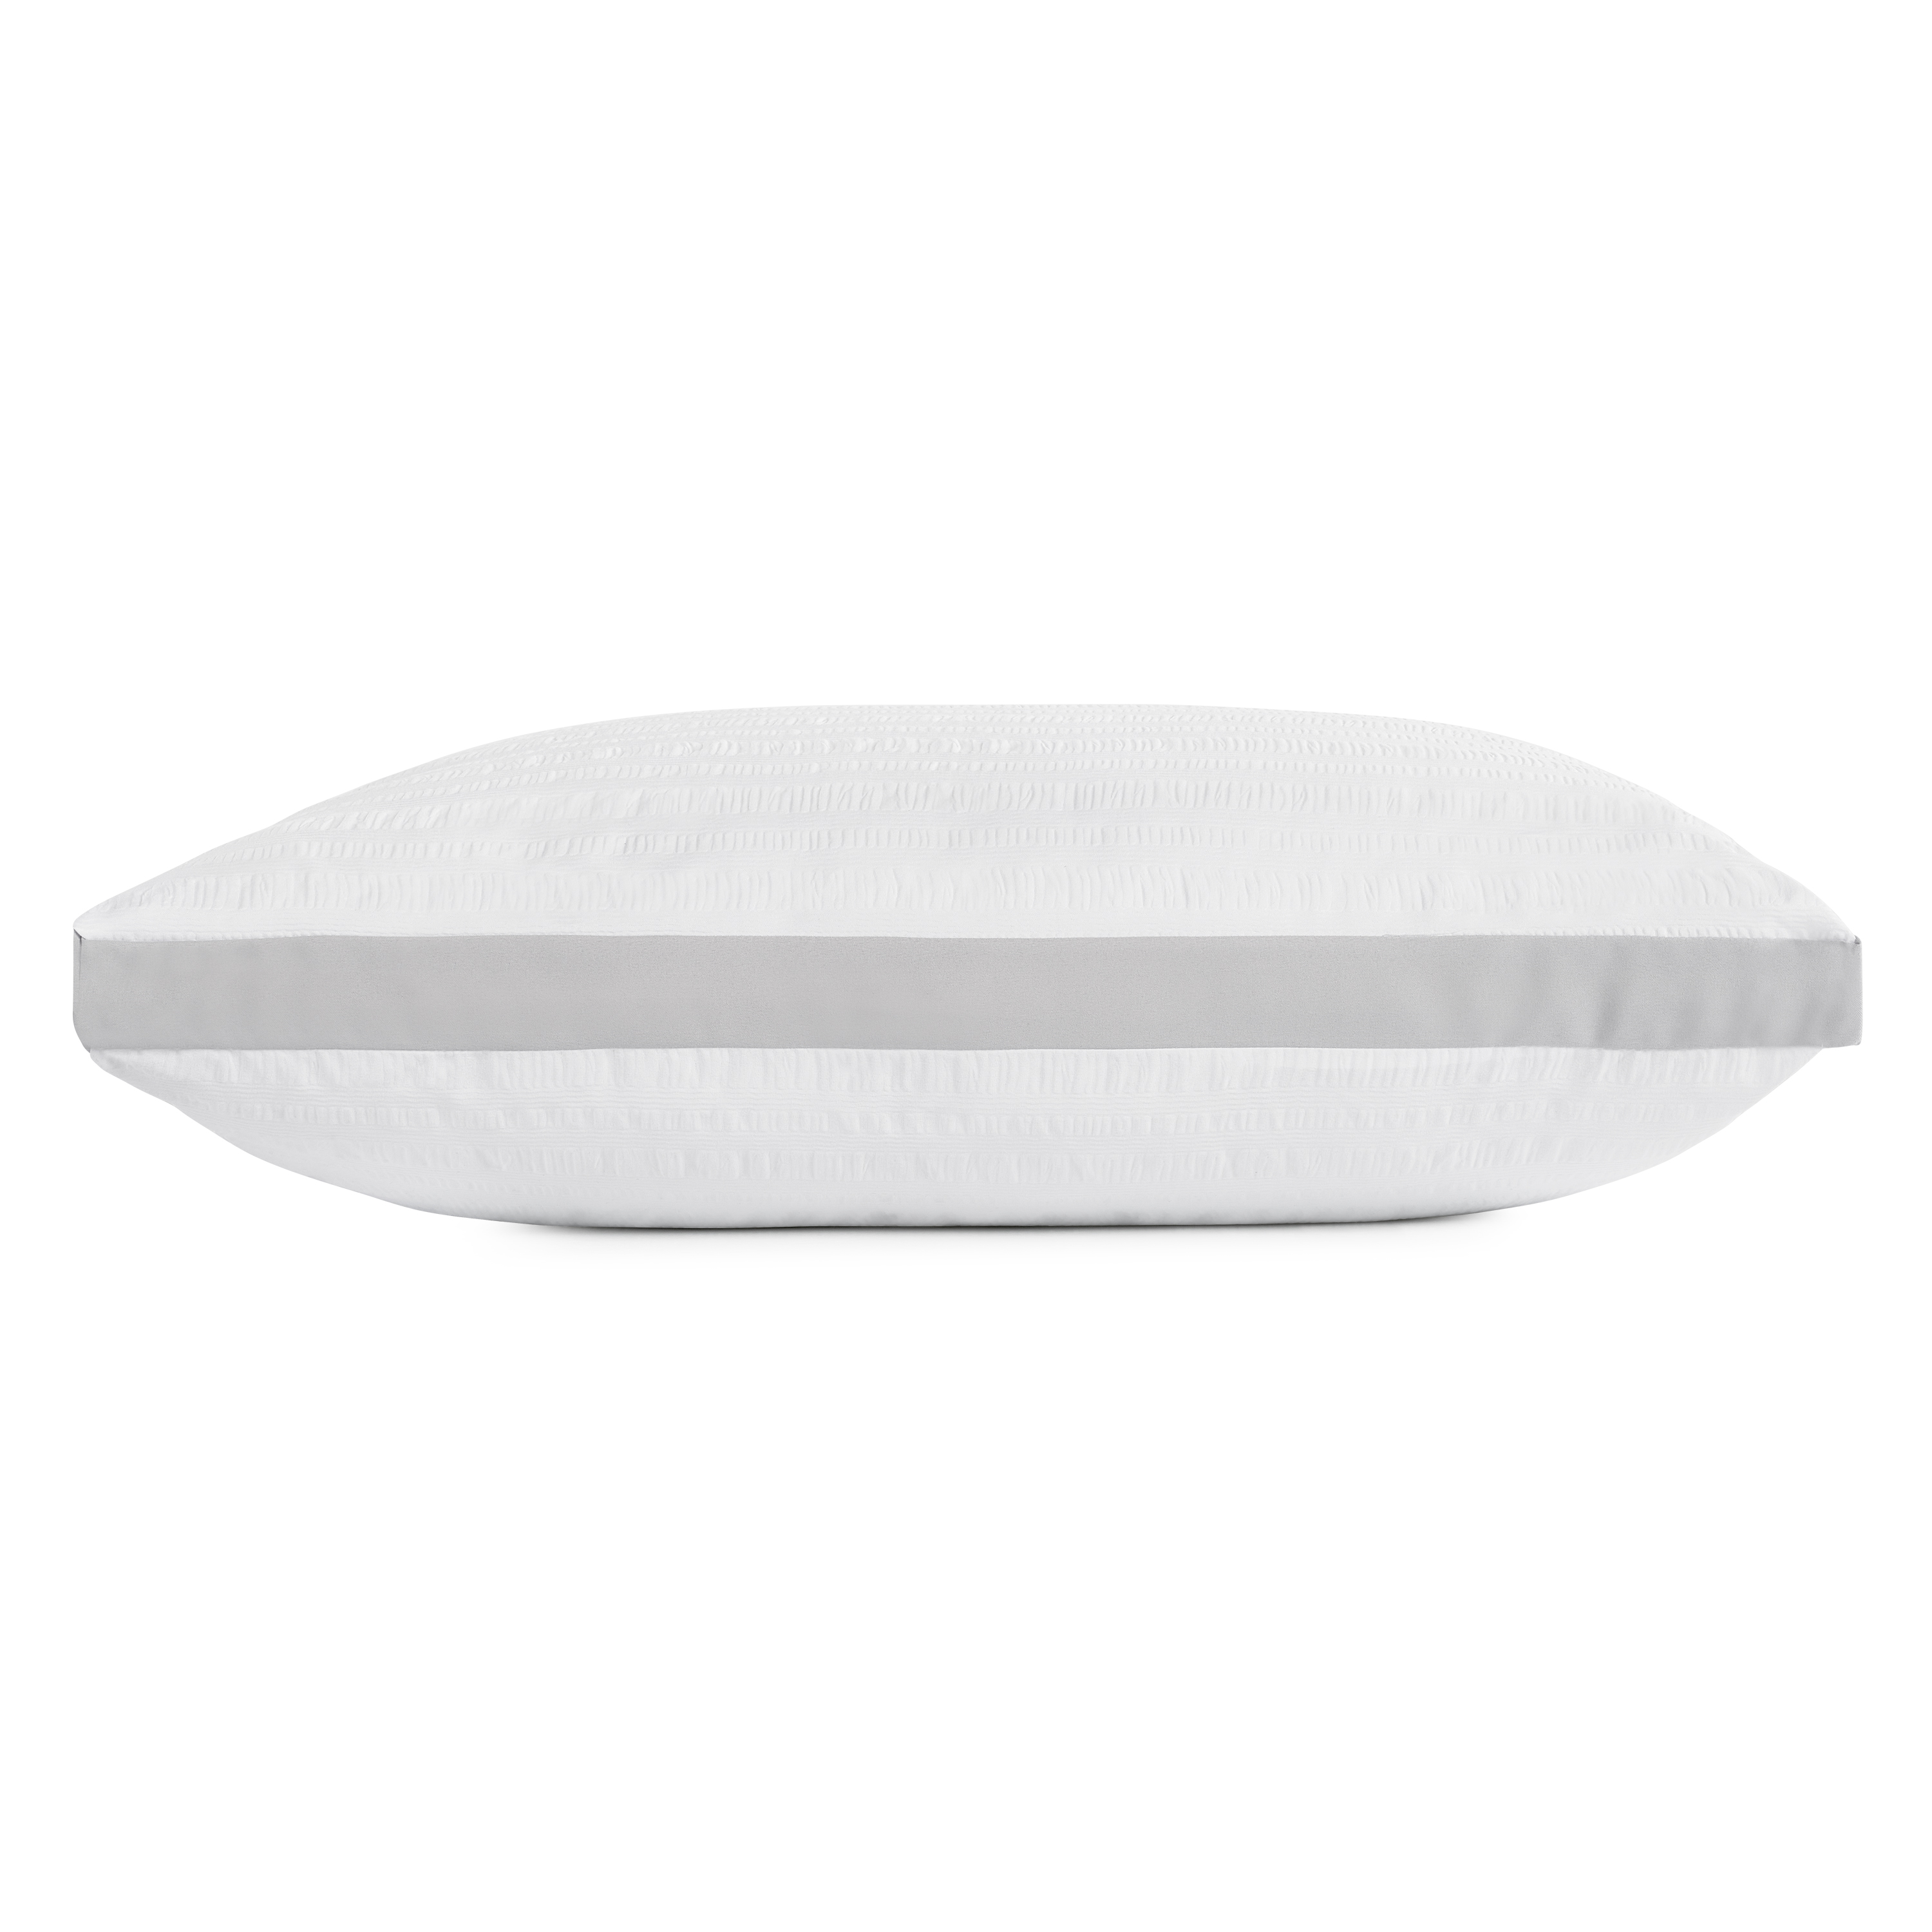 SertaPedic Dreamloft Bed Pillow, Polyester Fill, All Ages, Standard Size (20"x26") - image 5 of 6